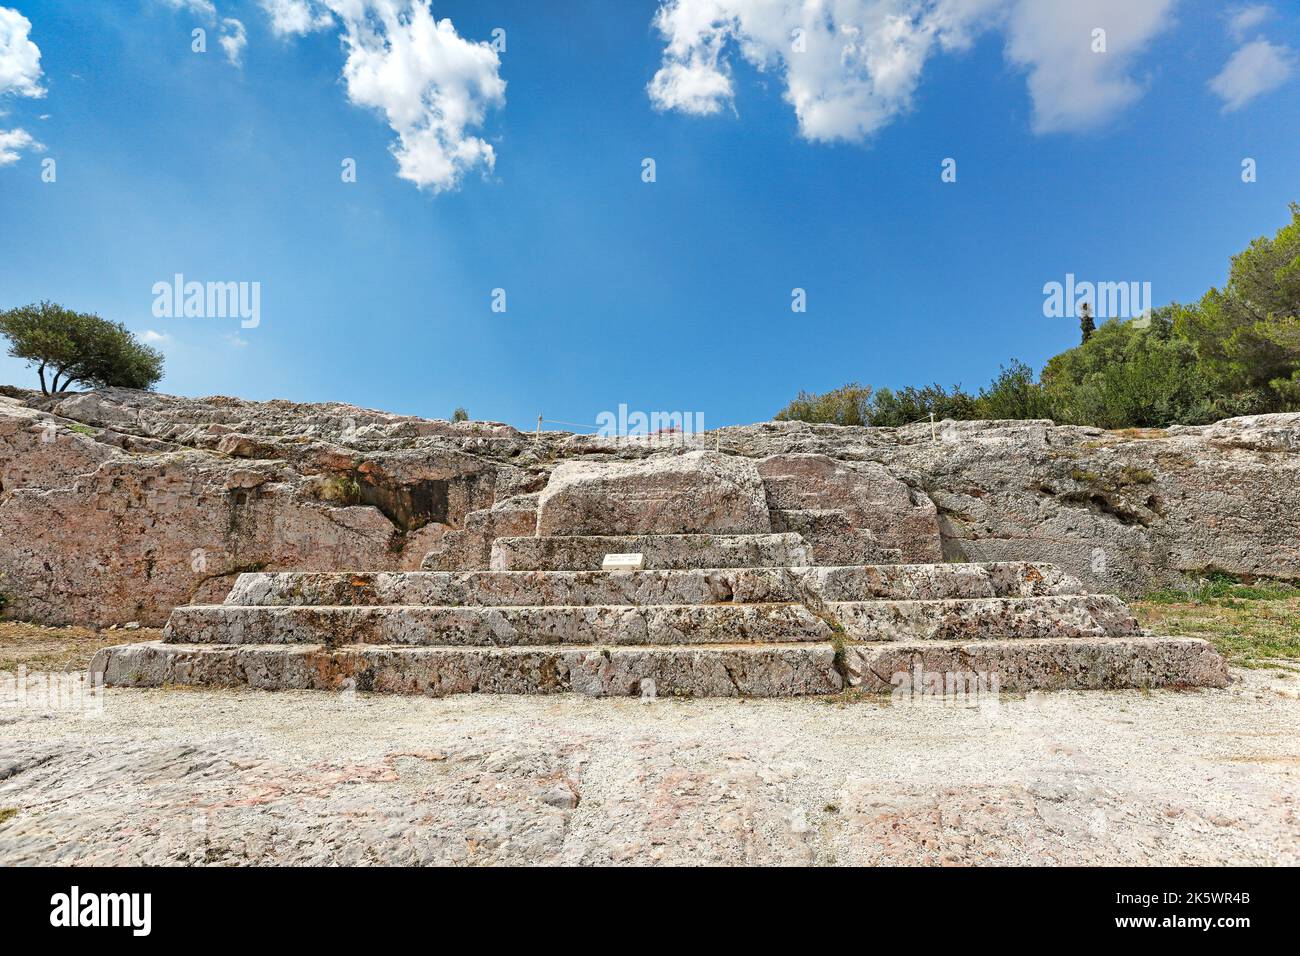 The Pnyx (507 B.C.) with the carved steps of the speaker's platform (bema)  near the Athenian Acropolis, Greece. Pericles, Demosthenes etc. spoke here Stock Photo